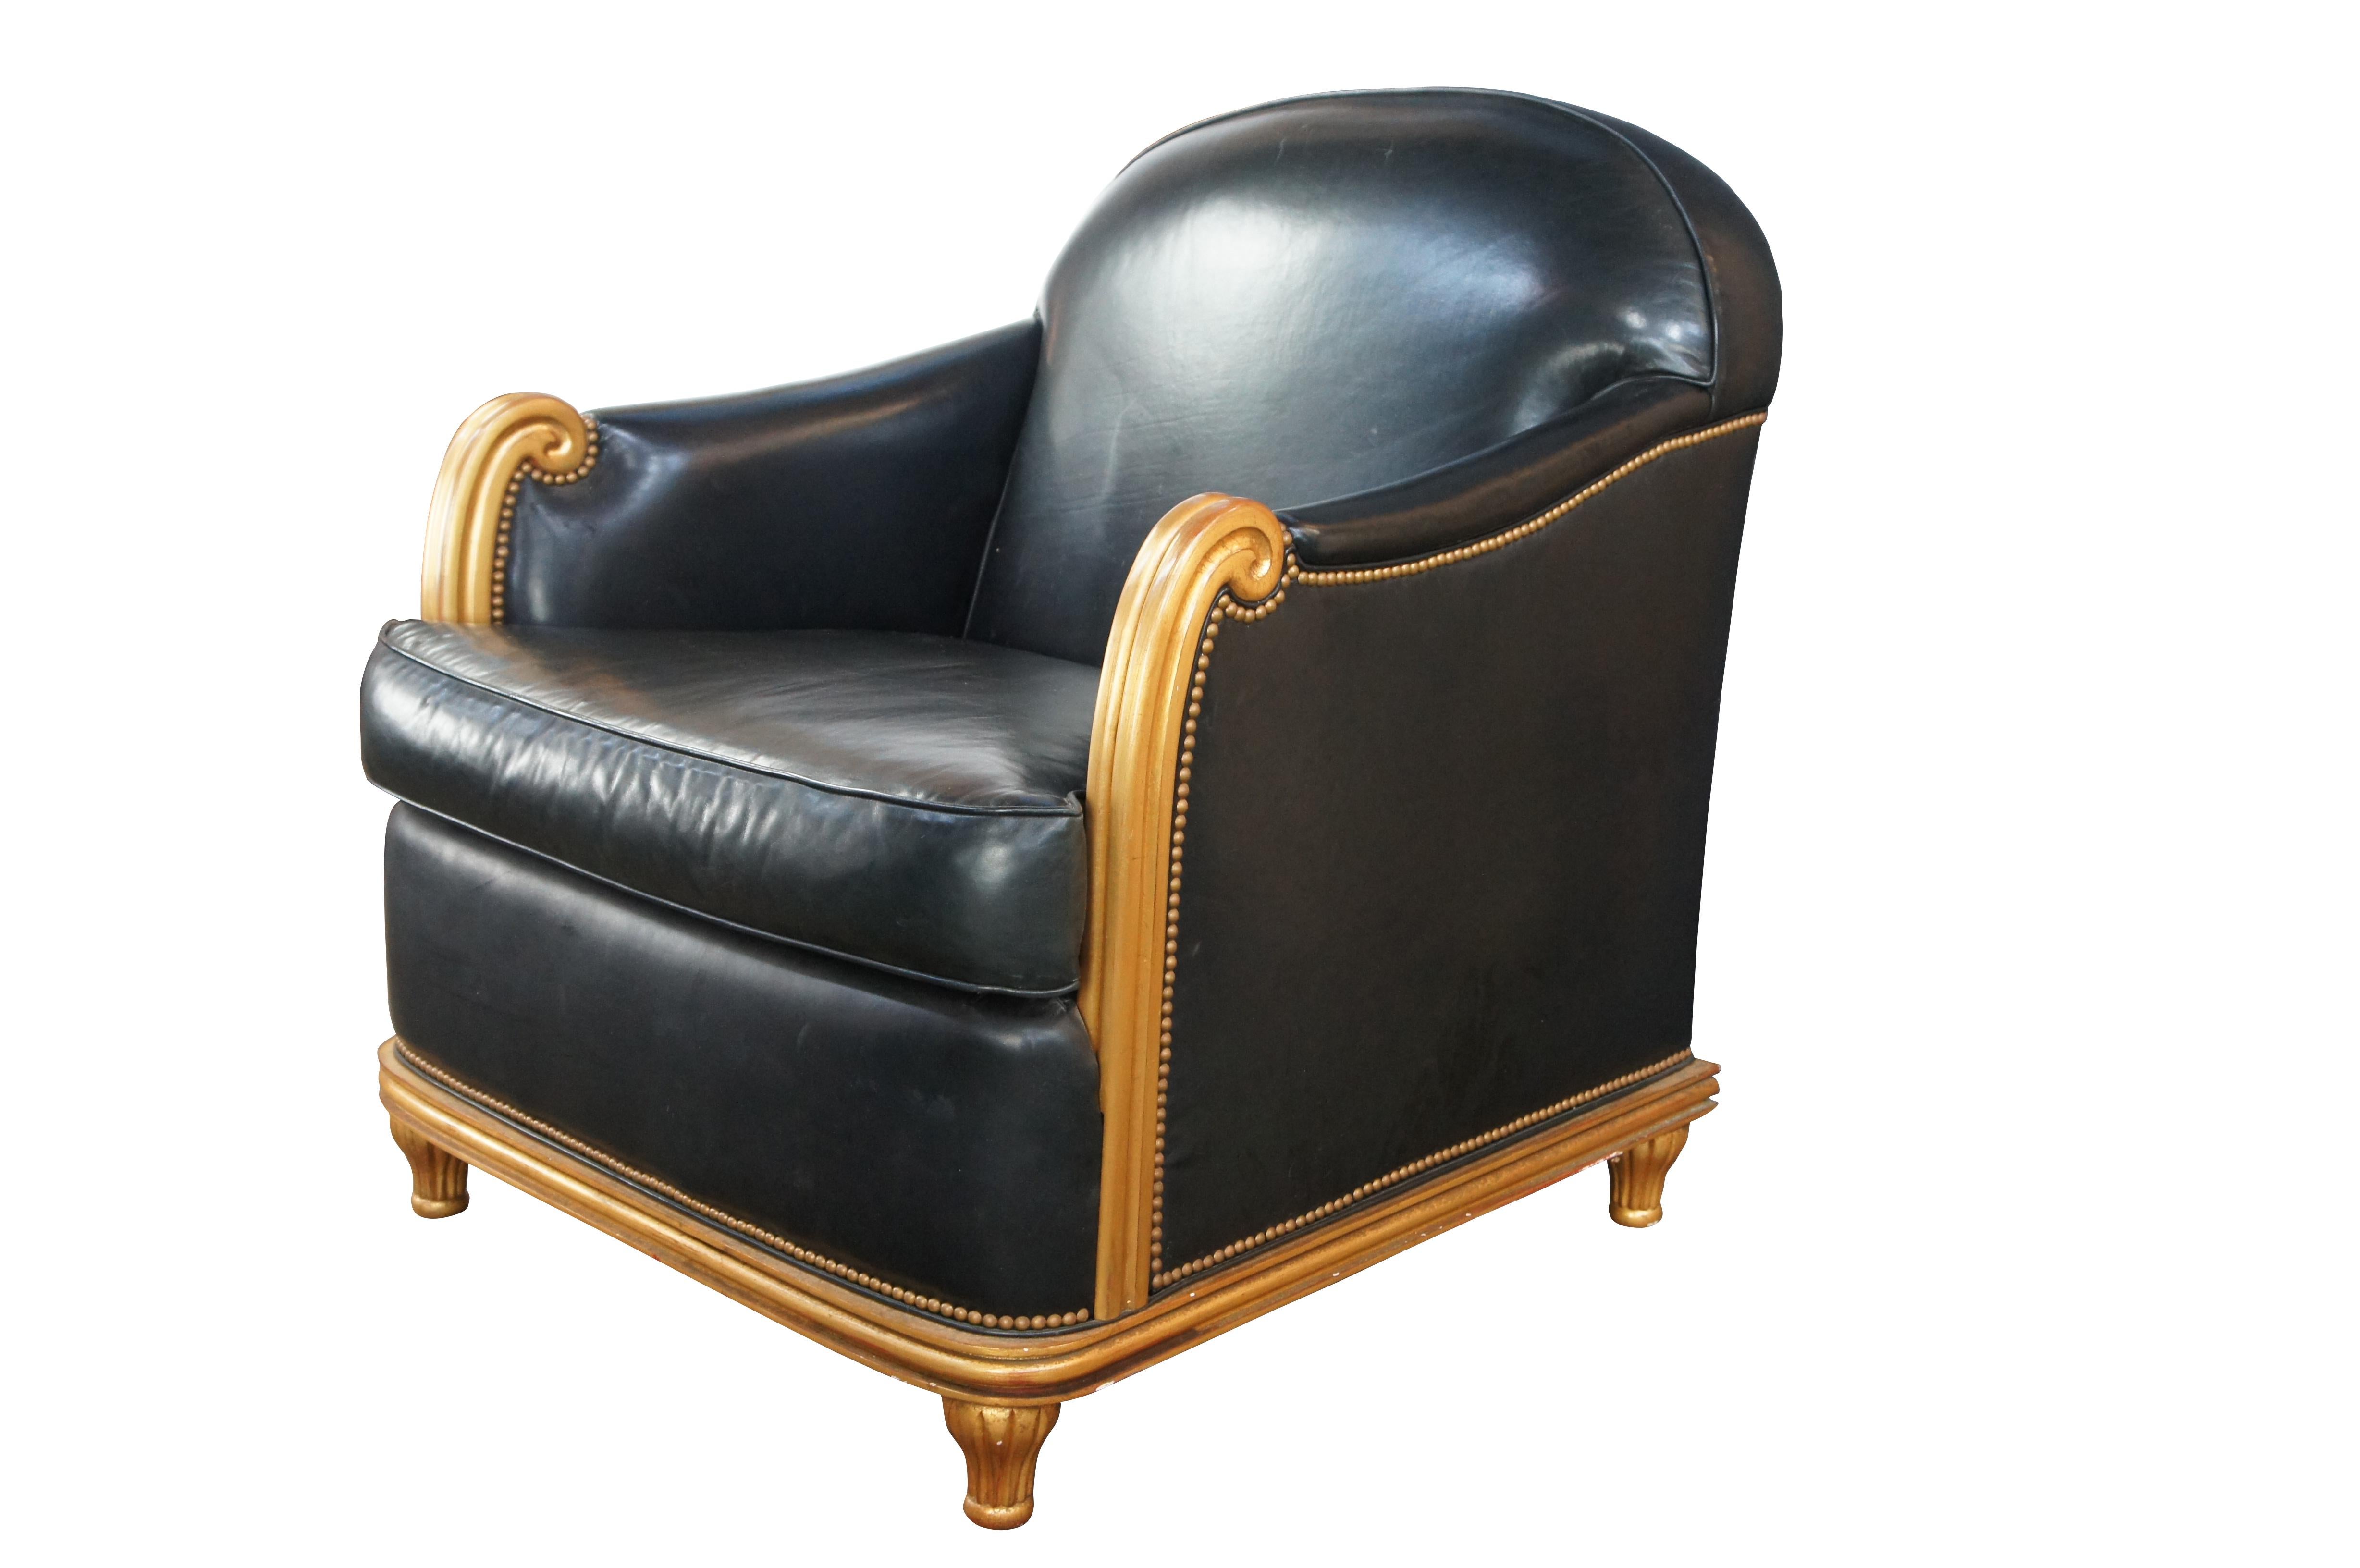 Grafton Furniture French Art Deco Black Leather & Gold Library Club Lounge Chair In Good Condition For Sale In Dayton, OH